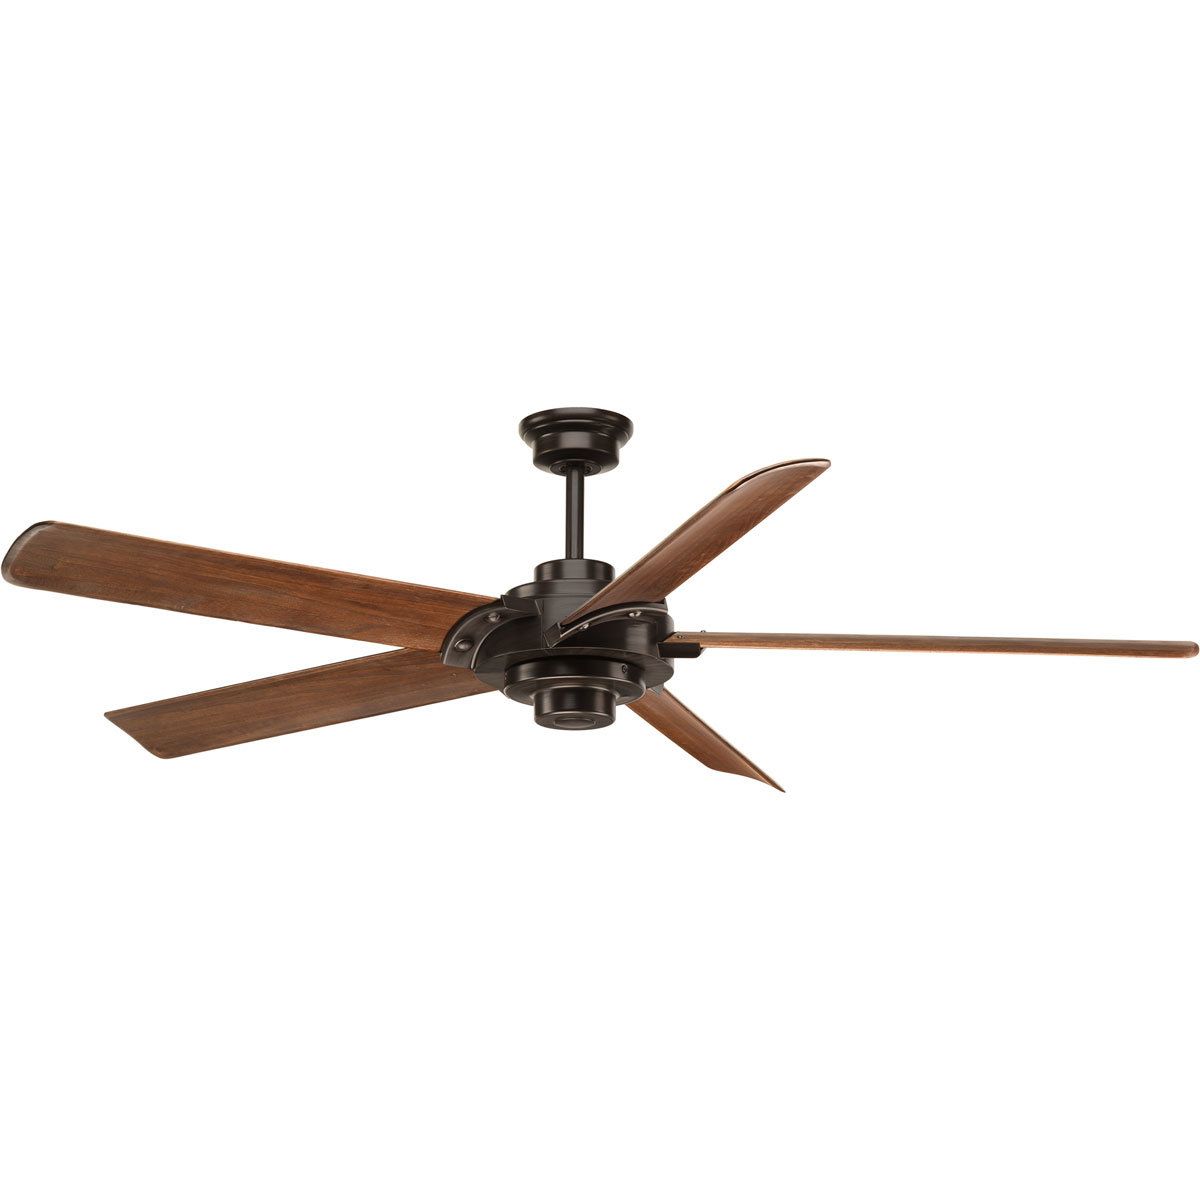 68" Thainara 5 Blade Ceiling Fan With Remote Throughout Newest 5 Blade Ceiling Fans (View 19 of 20)